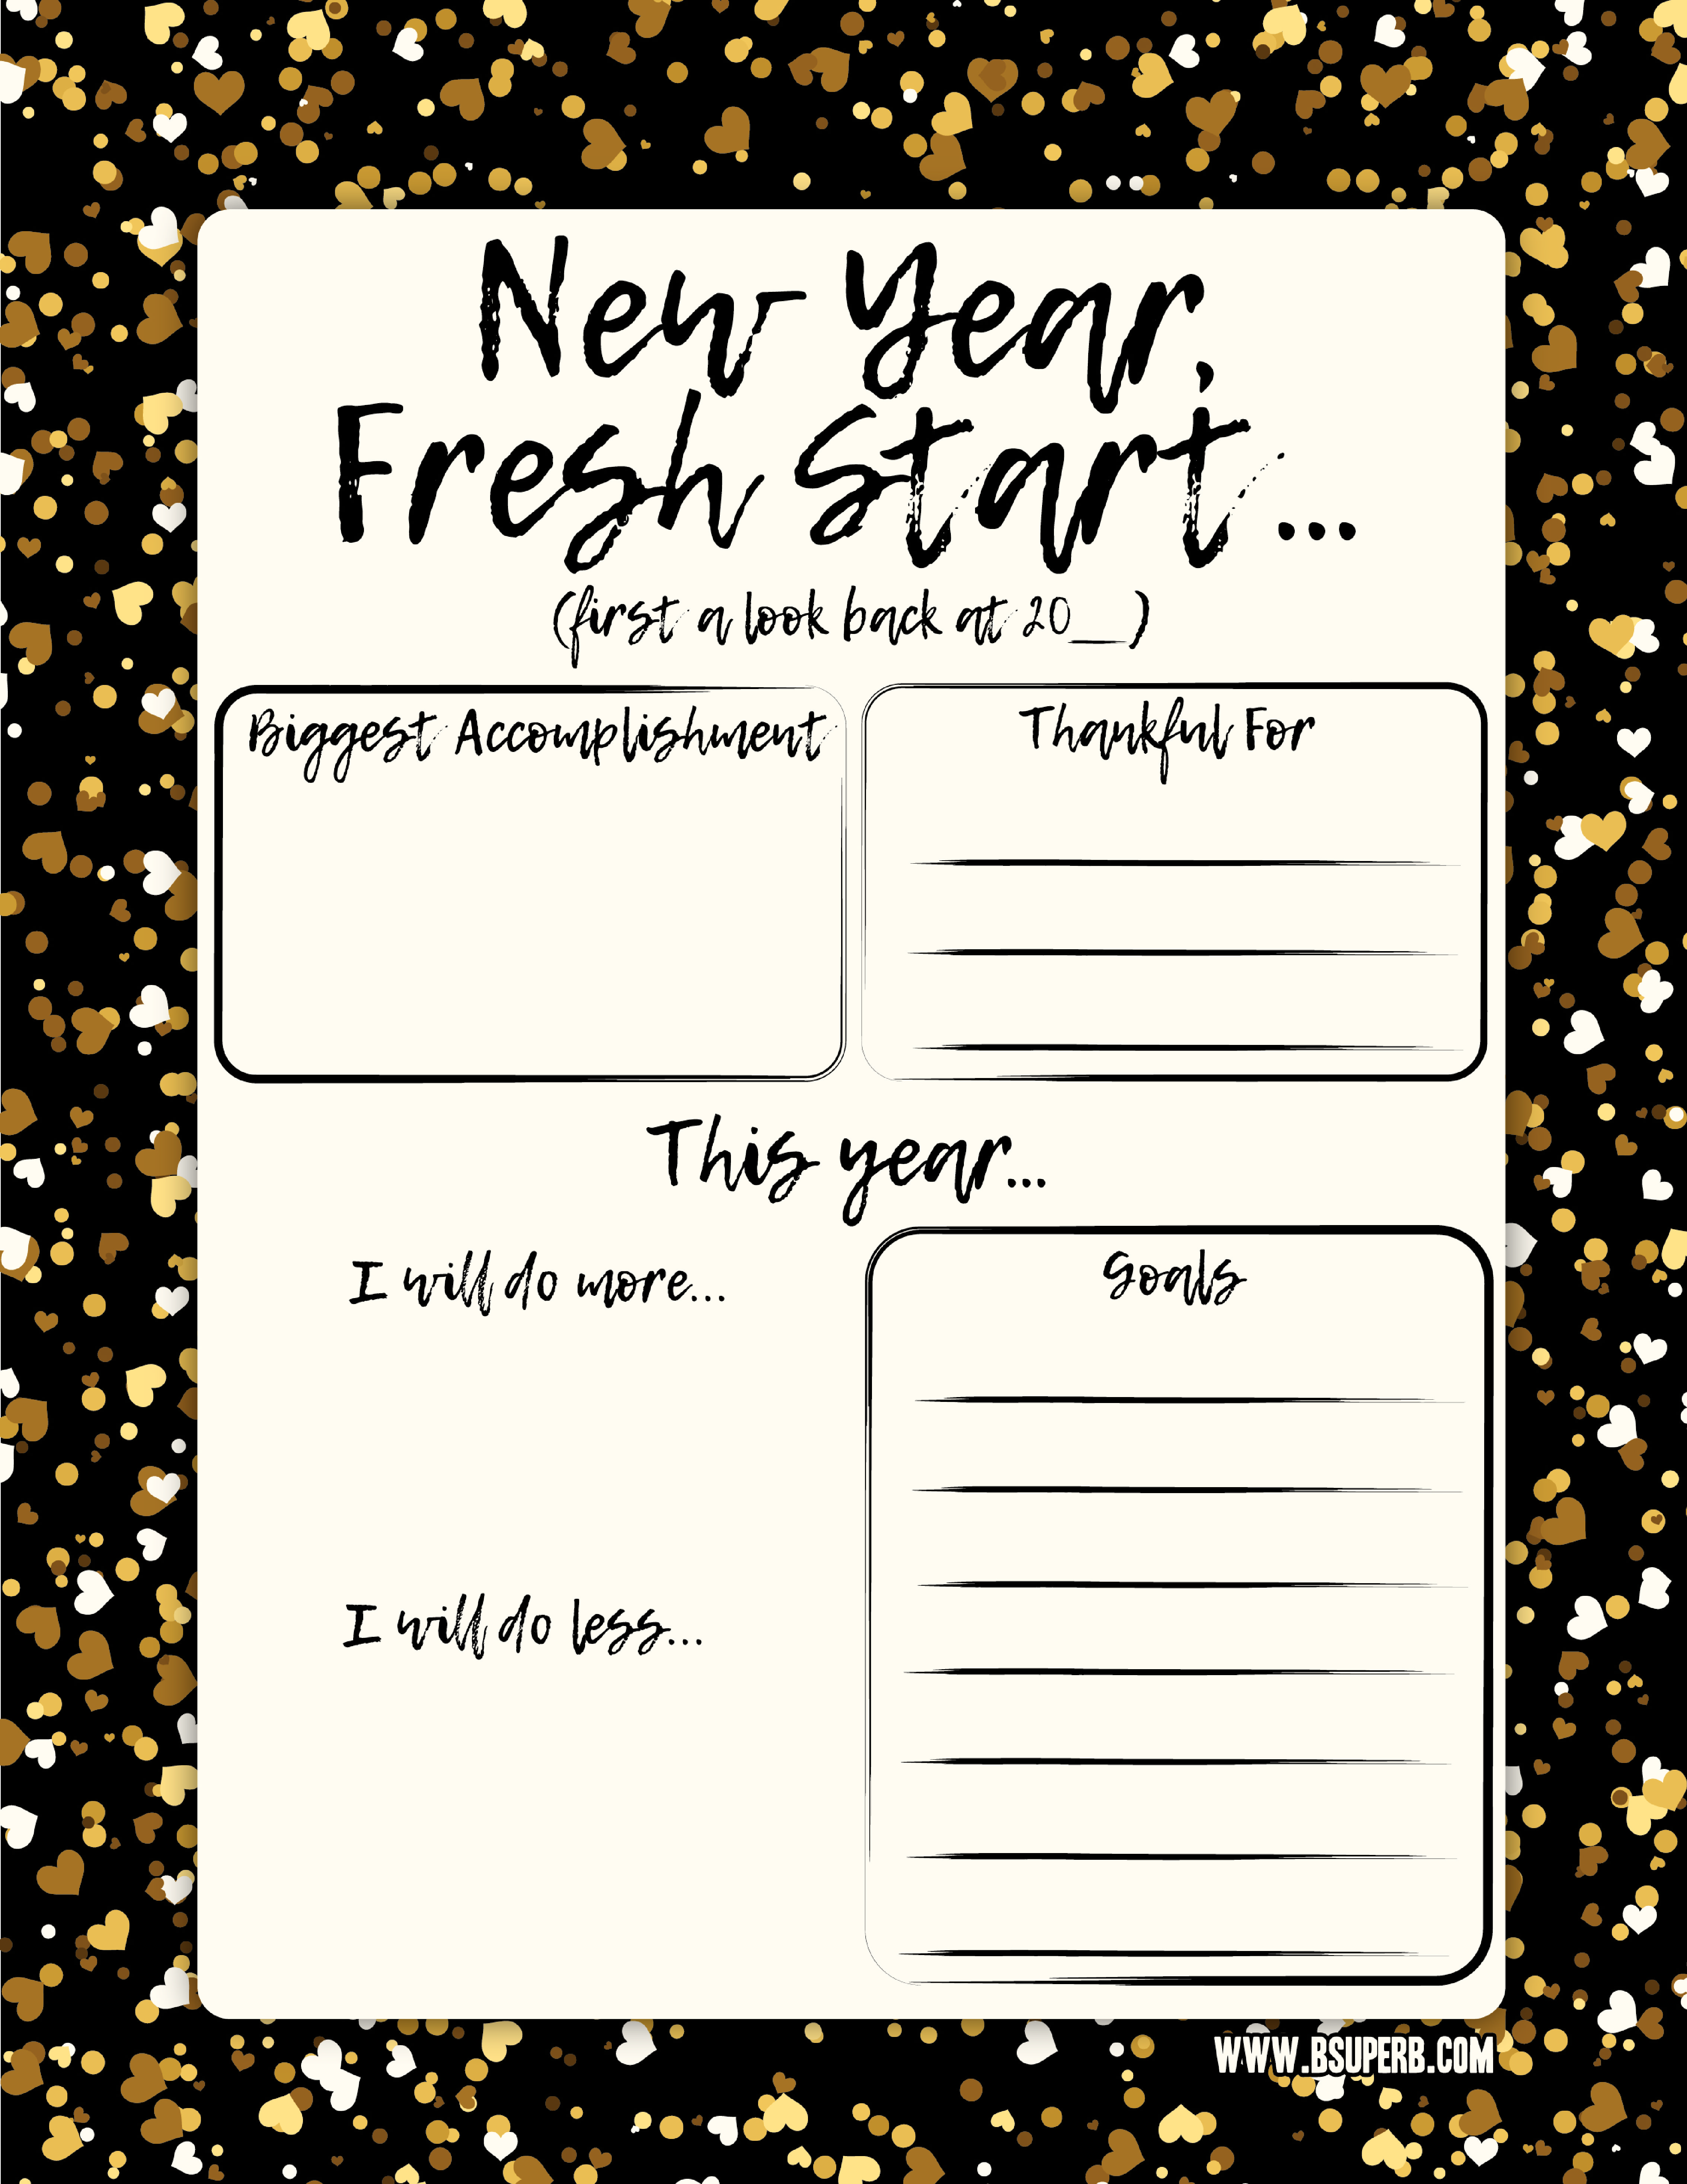 Free New Years Printable - goals and reflection